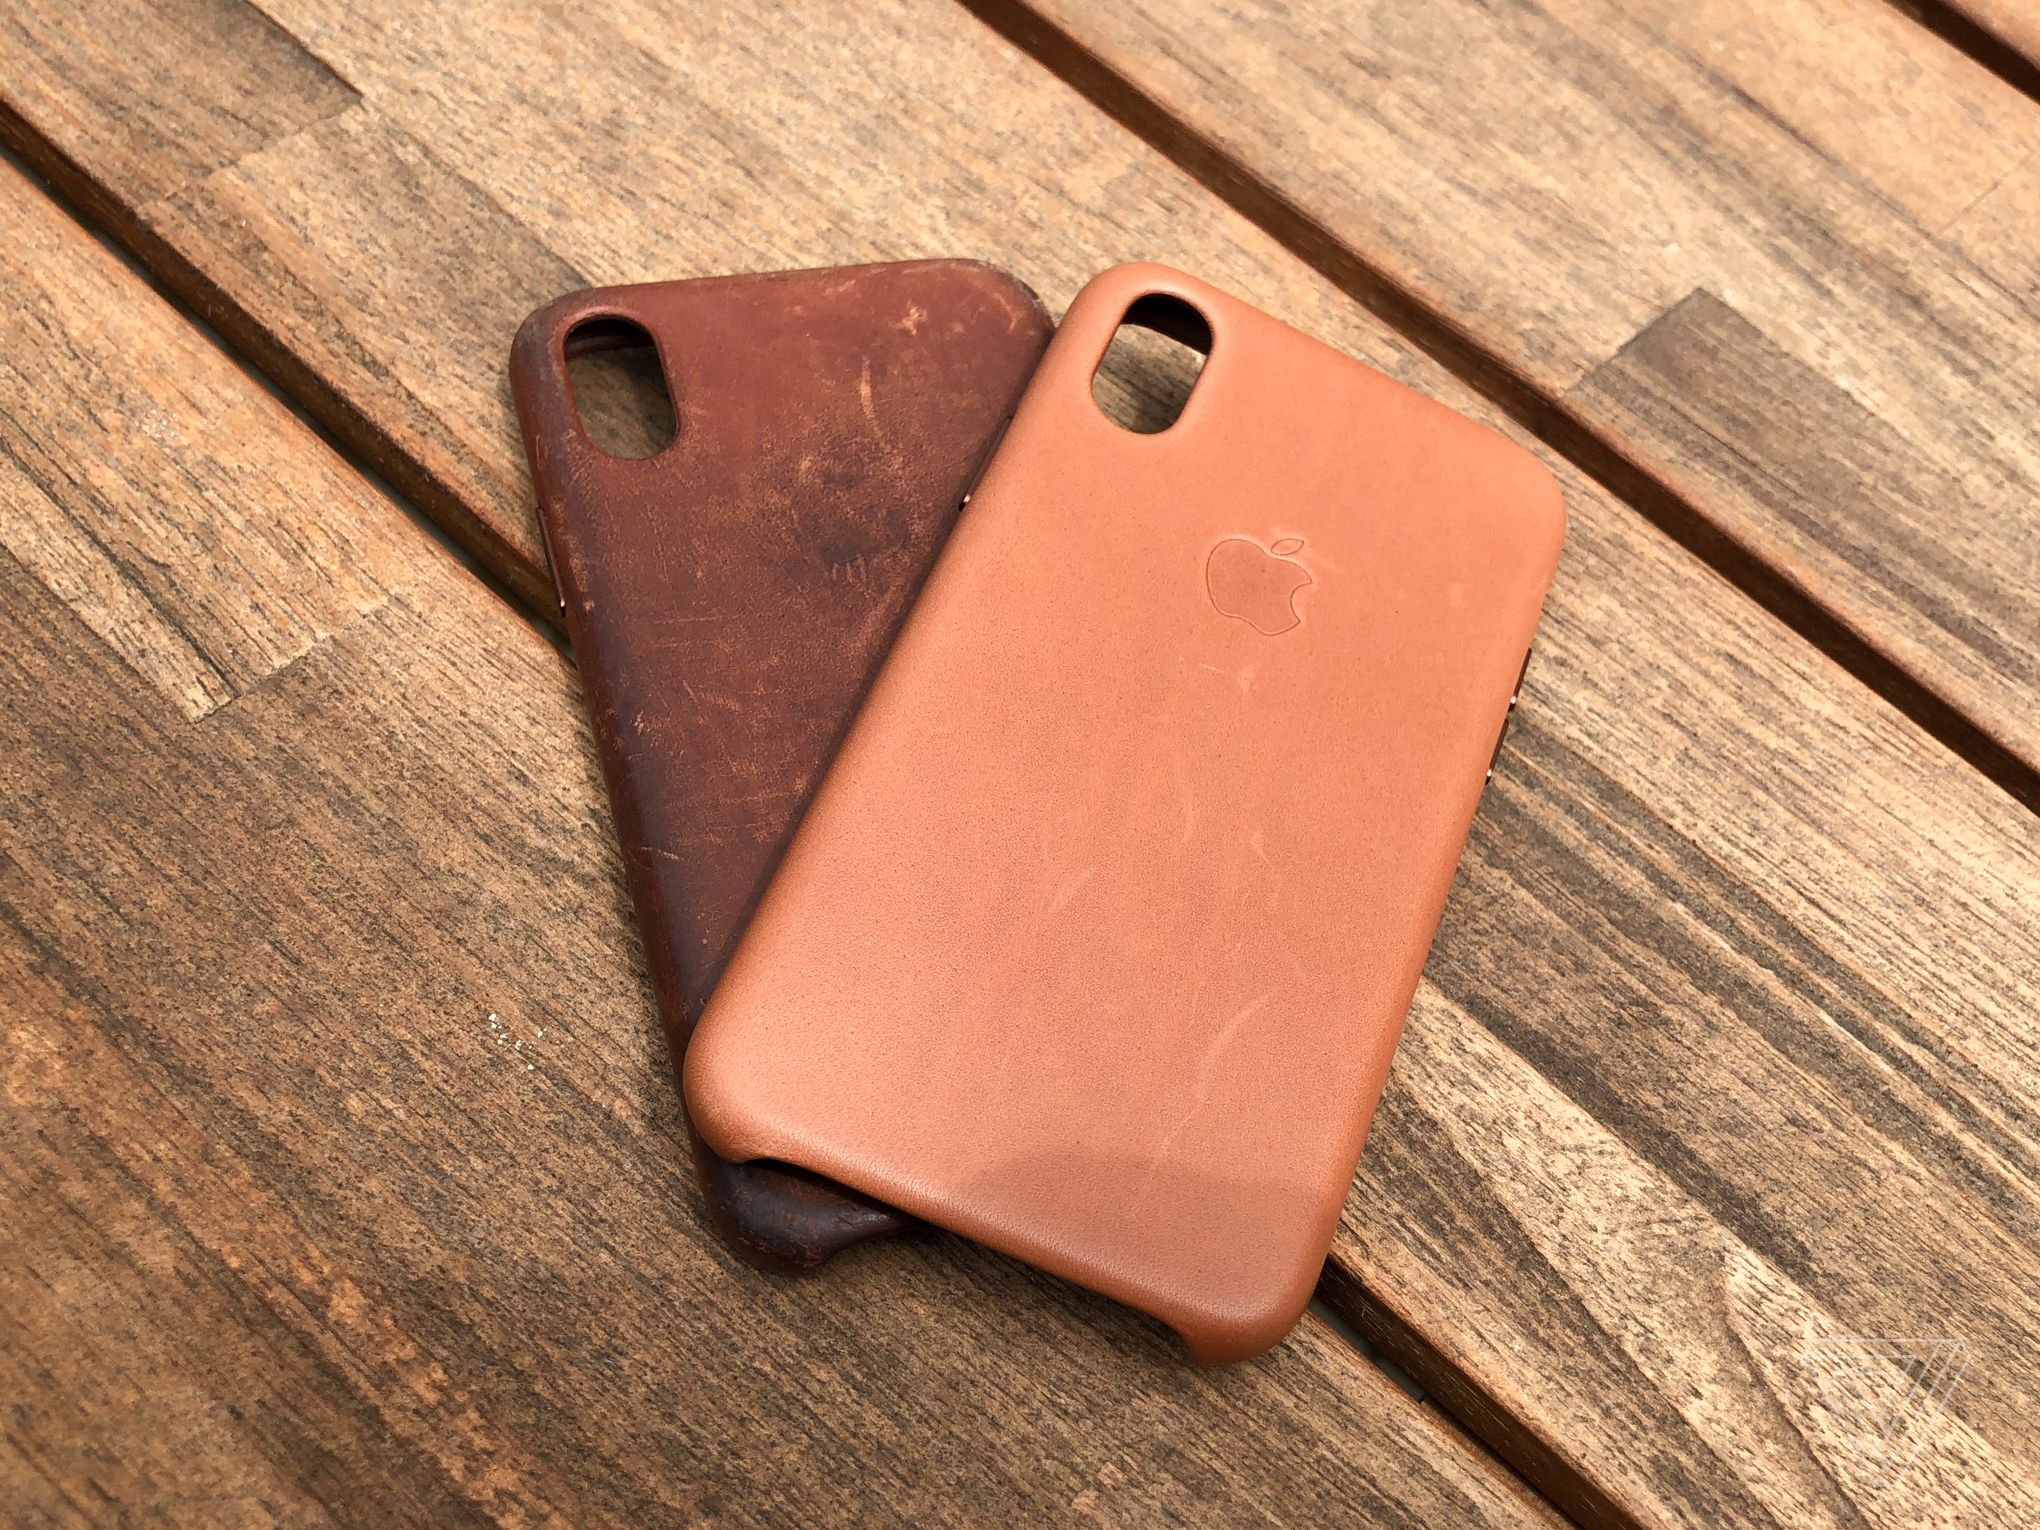 telegrama Viaje horno How to get a great patina on your iPhone X leather case - The Verge